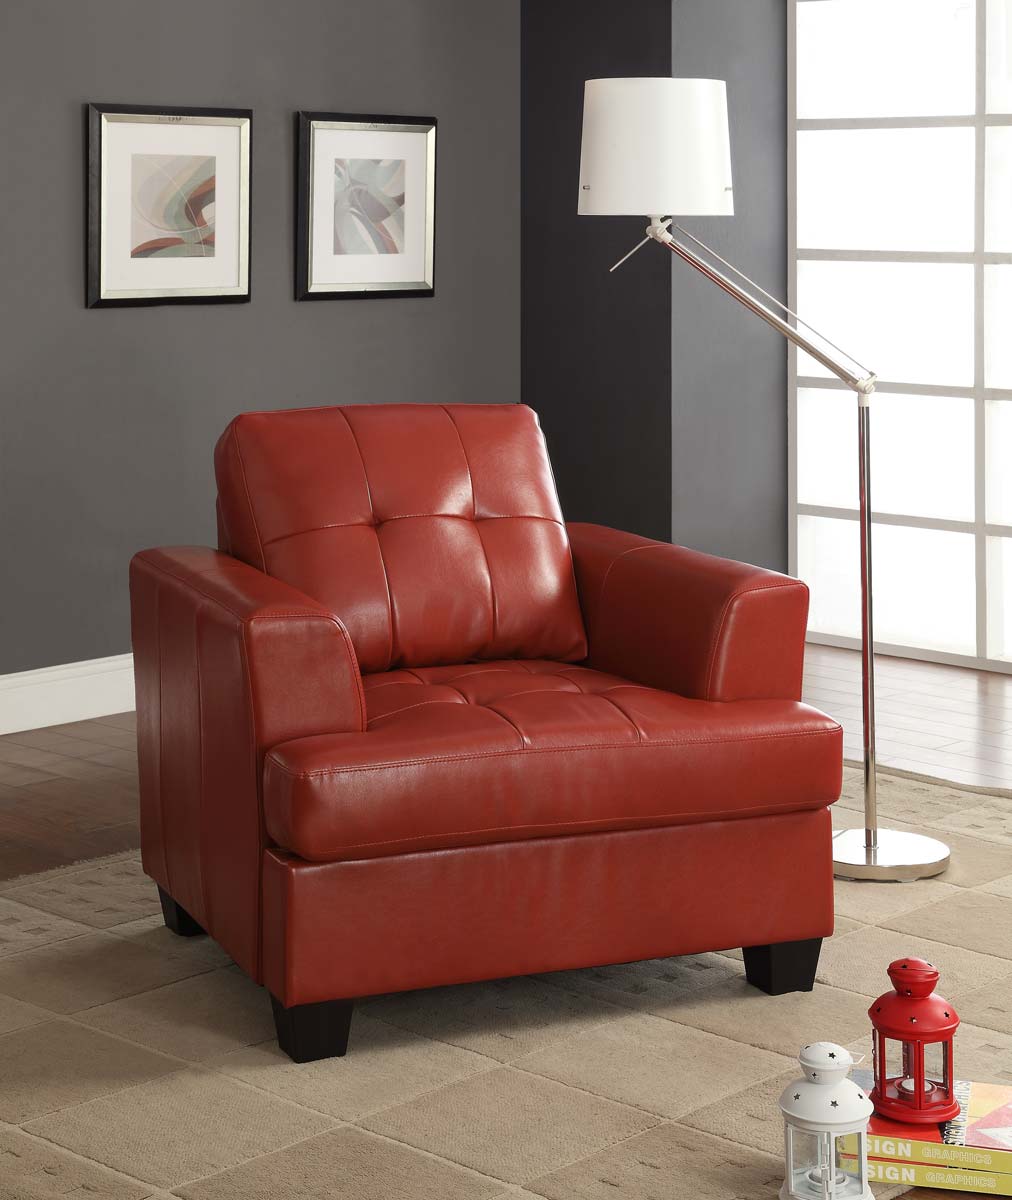 Homelegance Keaton Chair - Red - Bonded Leather Match